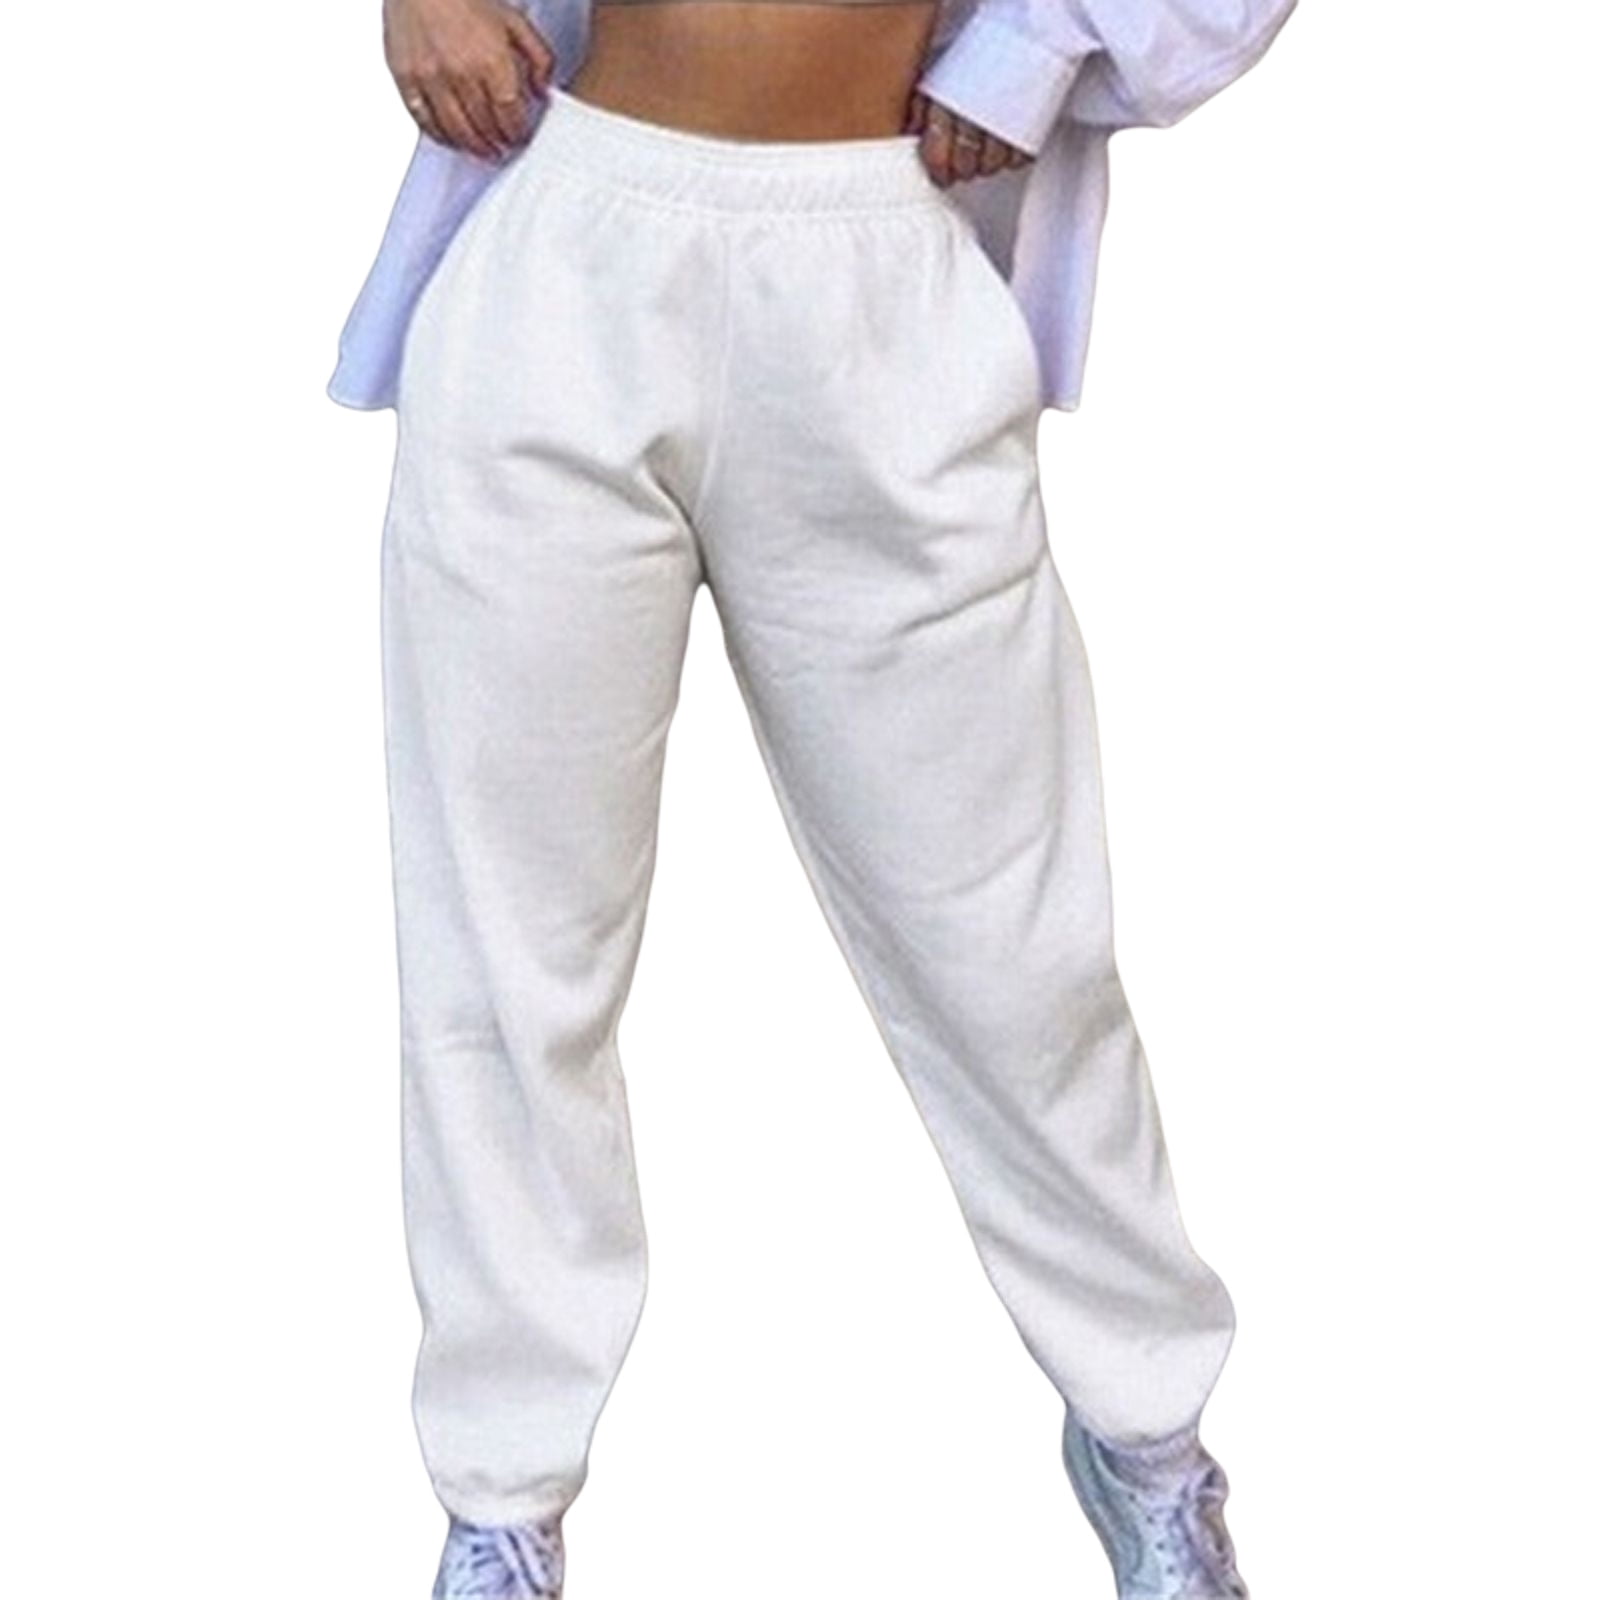 One opening Women Sweatpants Cinch Elastic High Waist Dance Jogger Sports  Ladies Casual Cotton Baggy Trousers Pockets (S, Thin Fleece White)